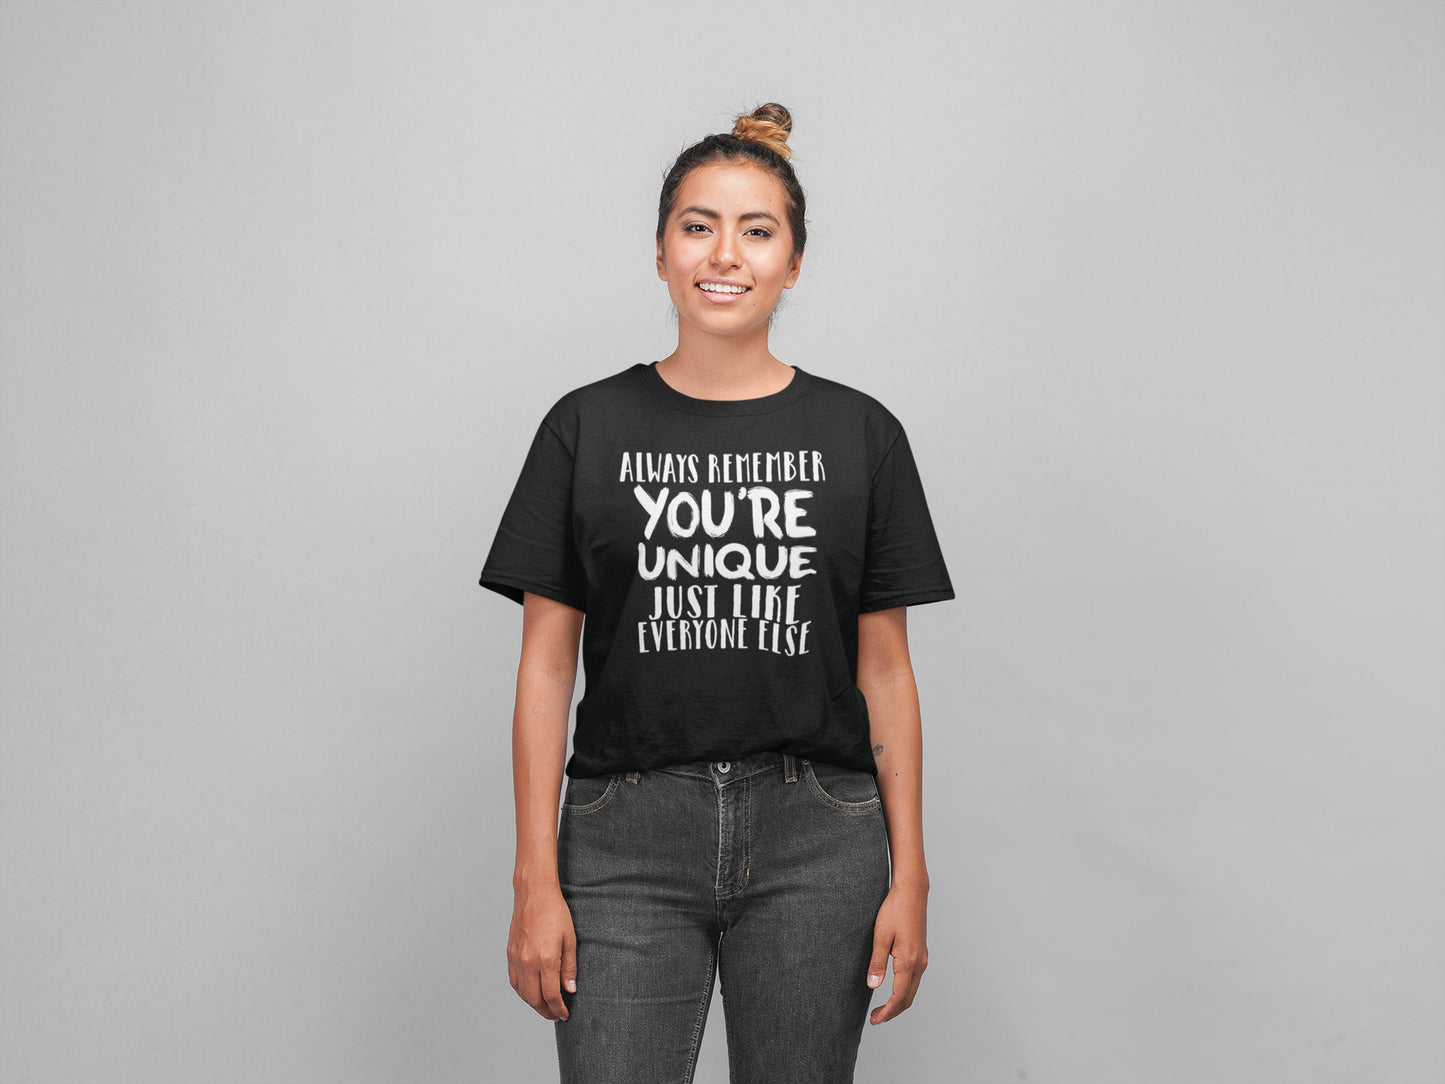 Always Remember You're Unique Just Like Everyone Else l Funny T-Shirt l Sarcasm Shirt